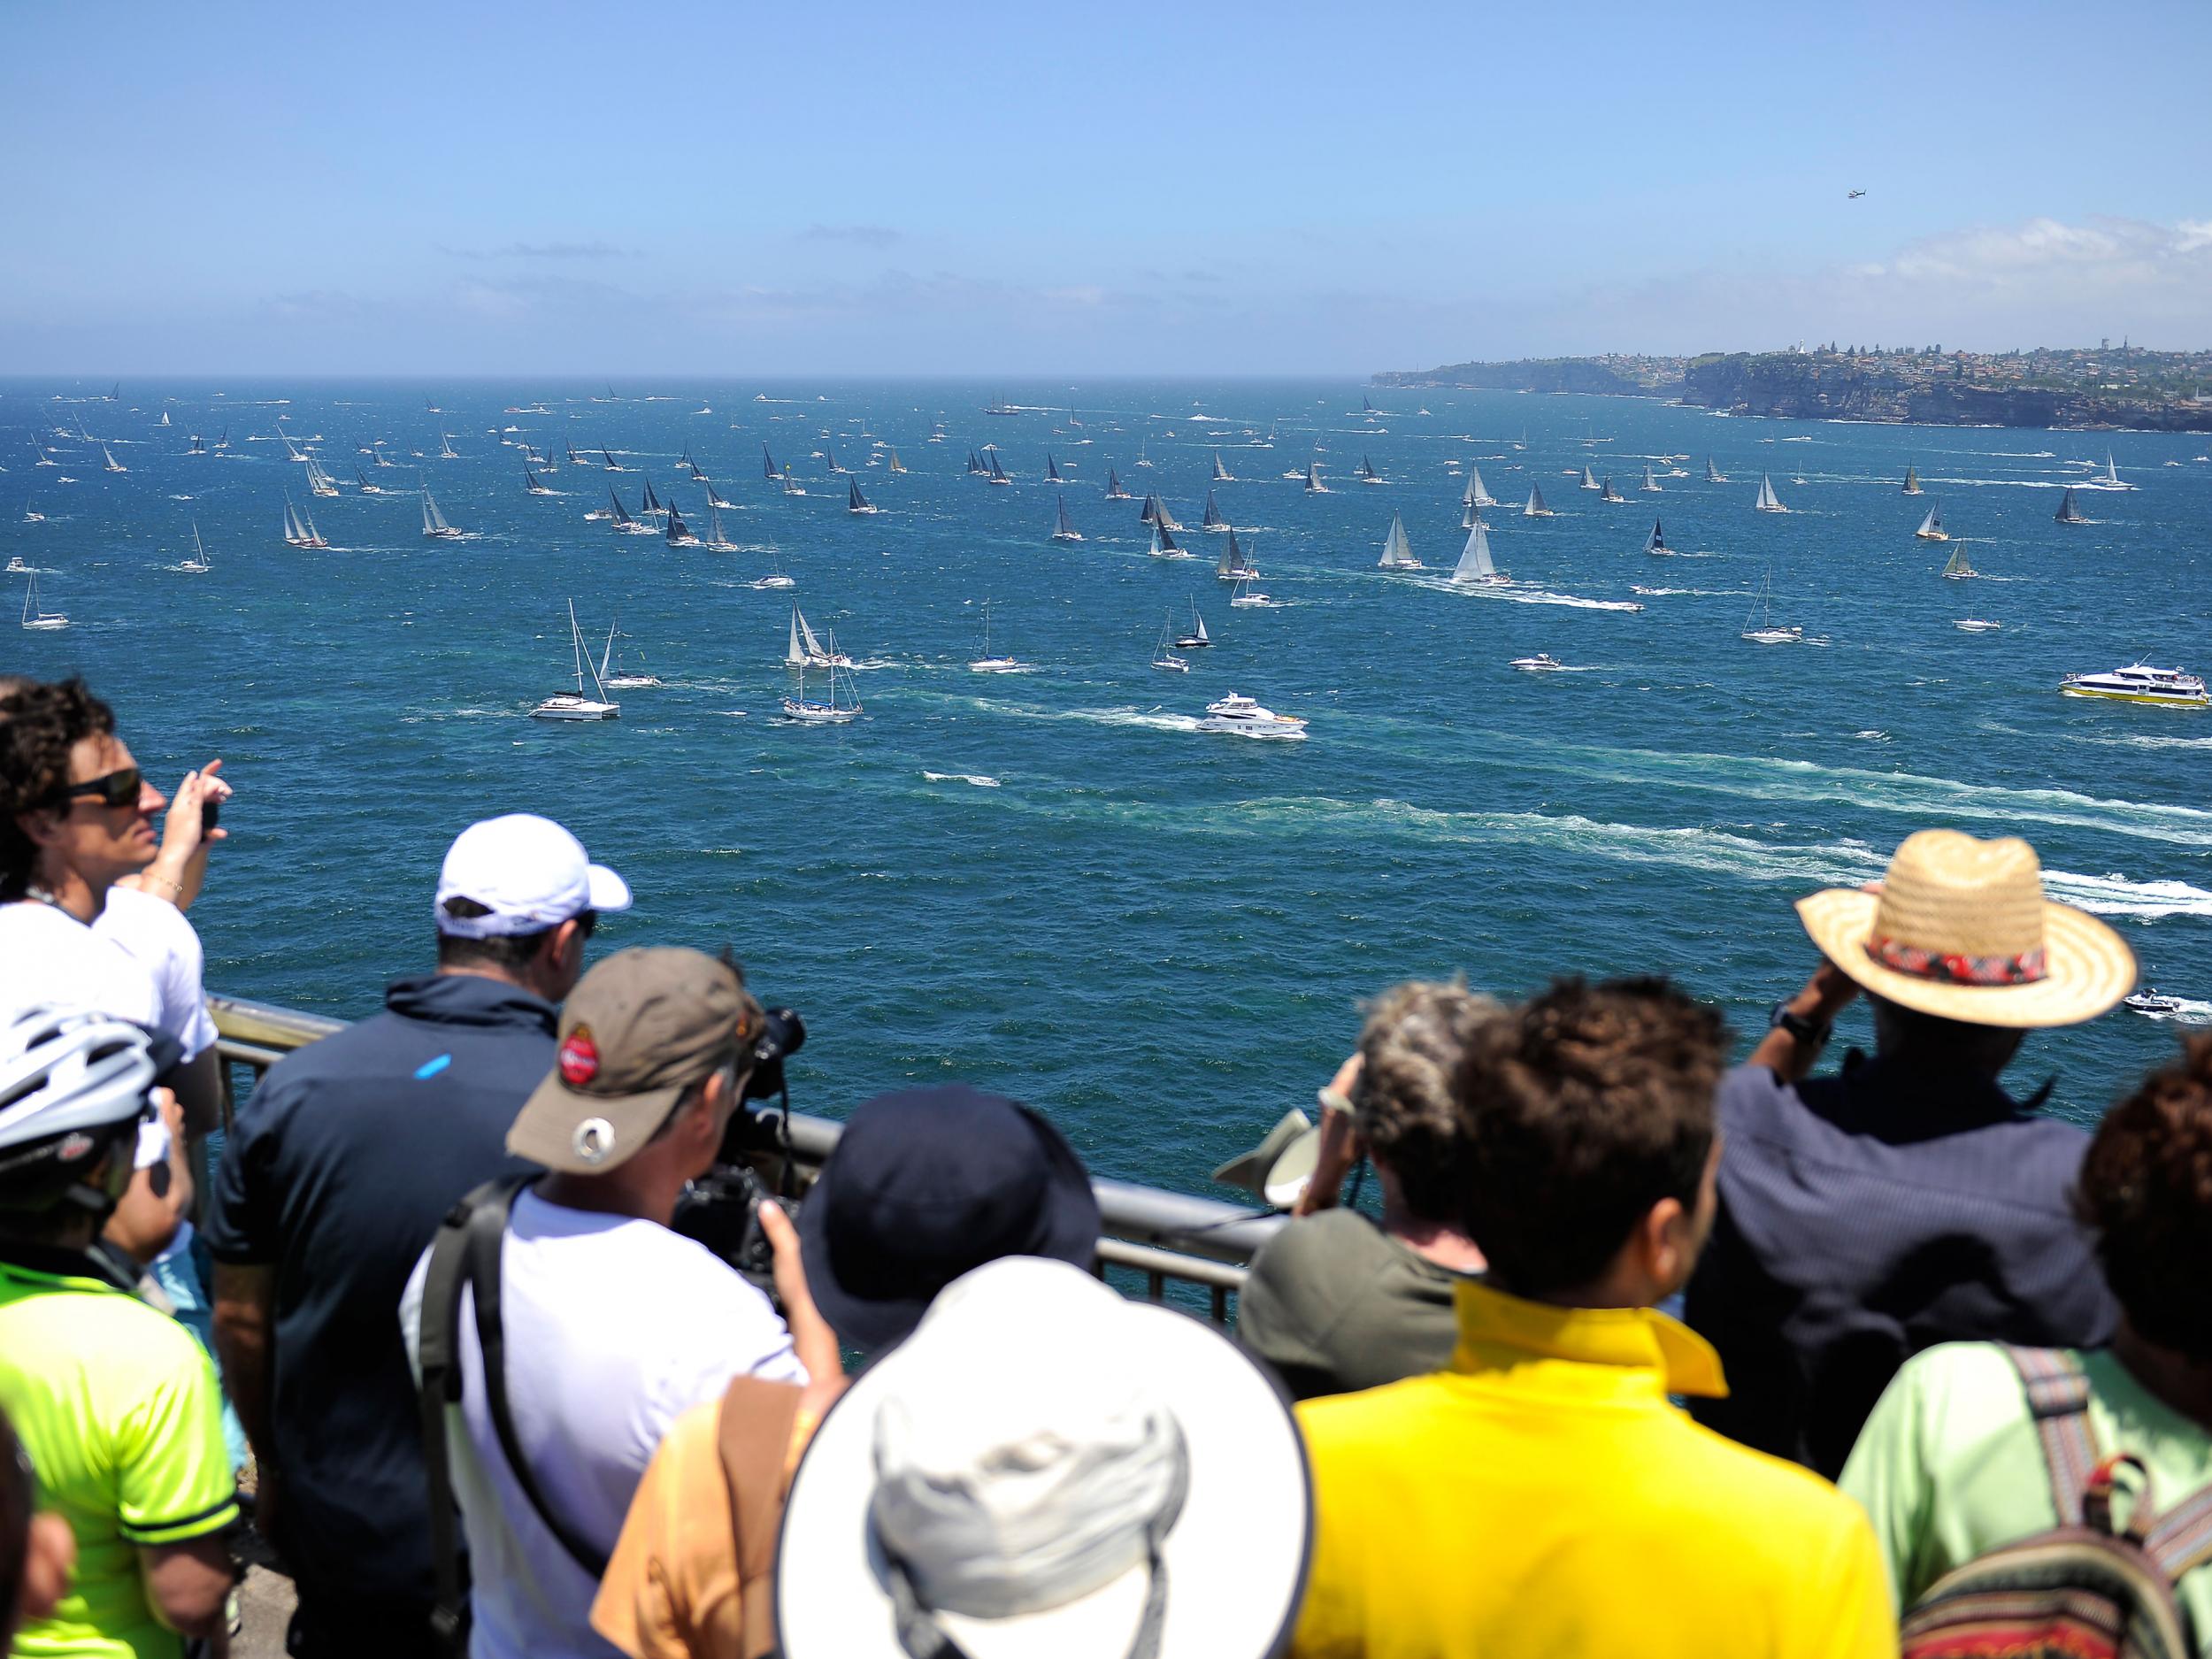 Spectators look on as the fleet leaves Sydney Heads during the 2014 Sydney To Hobart